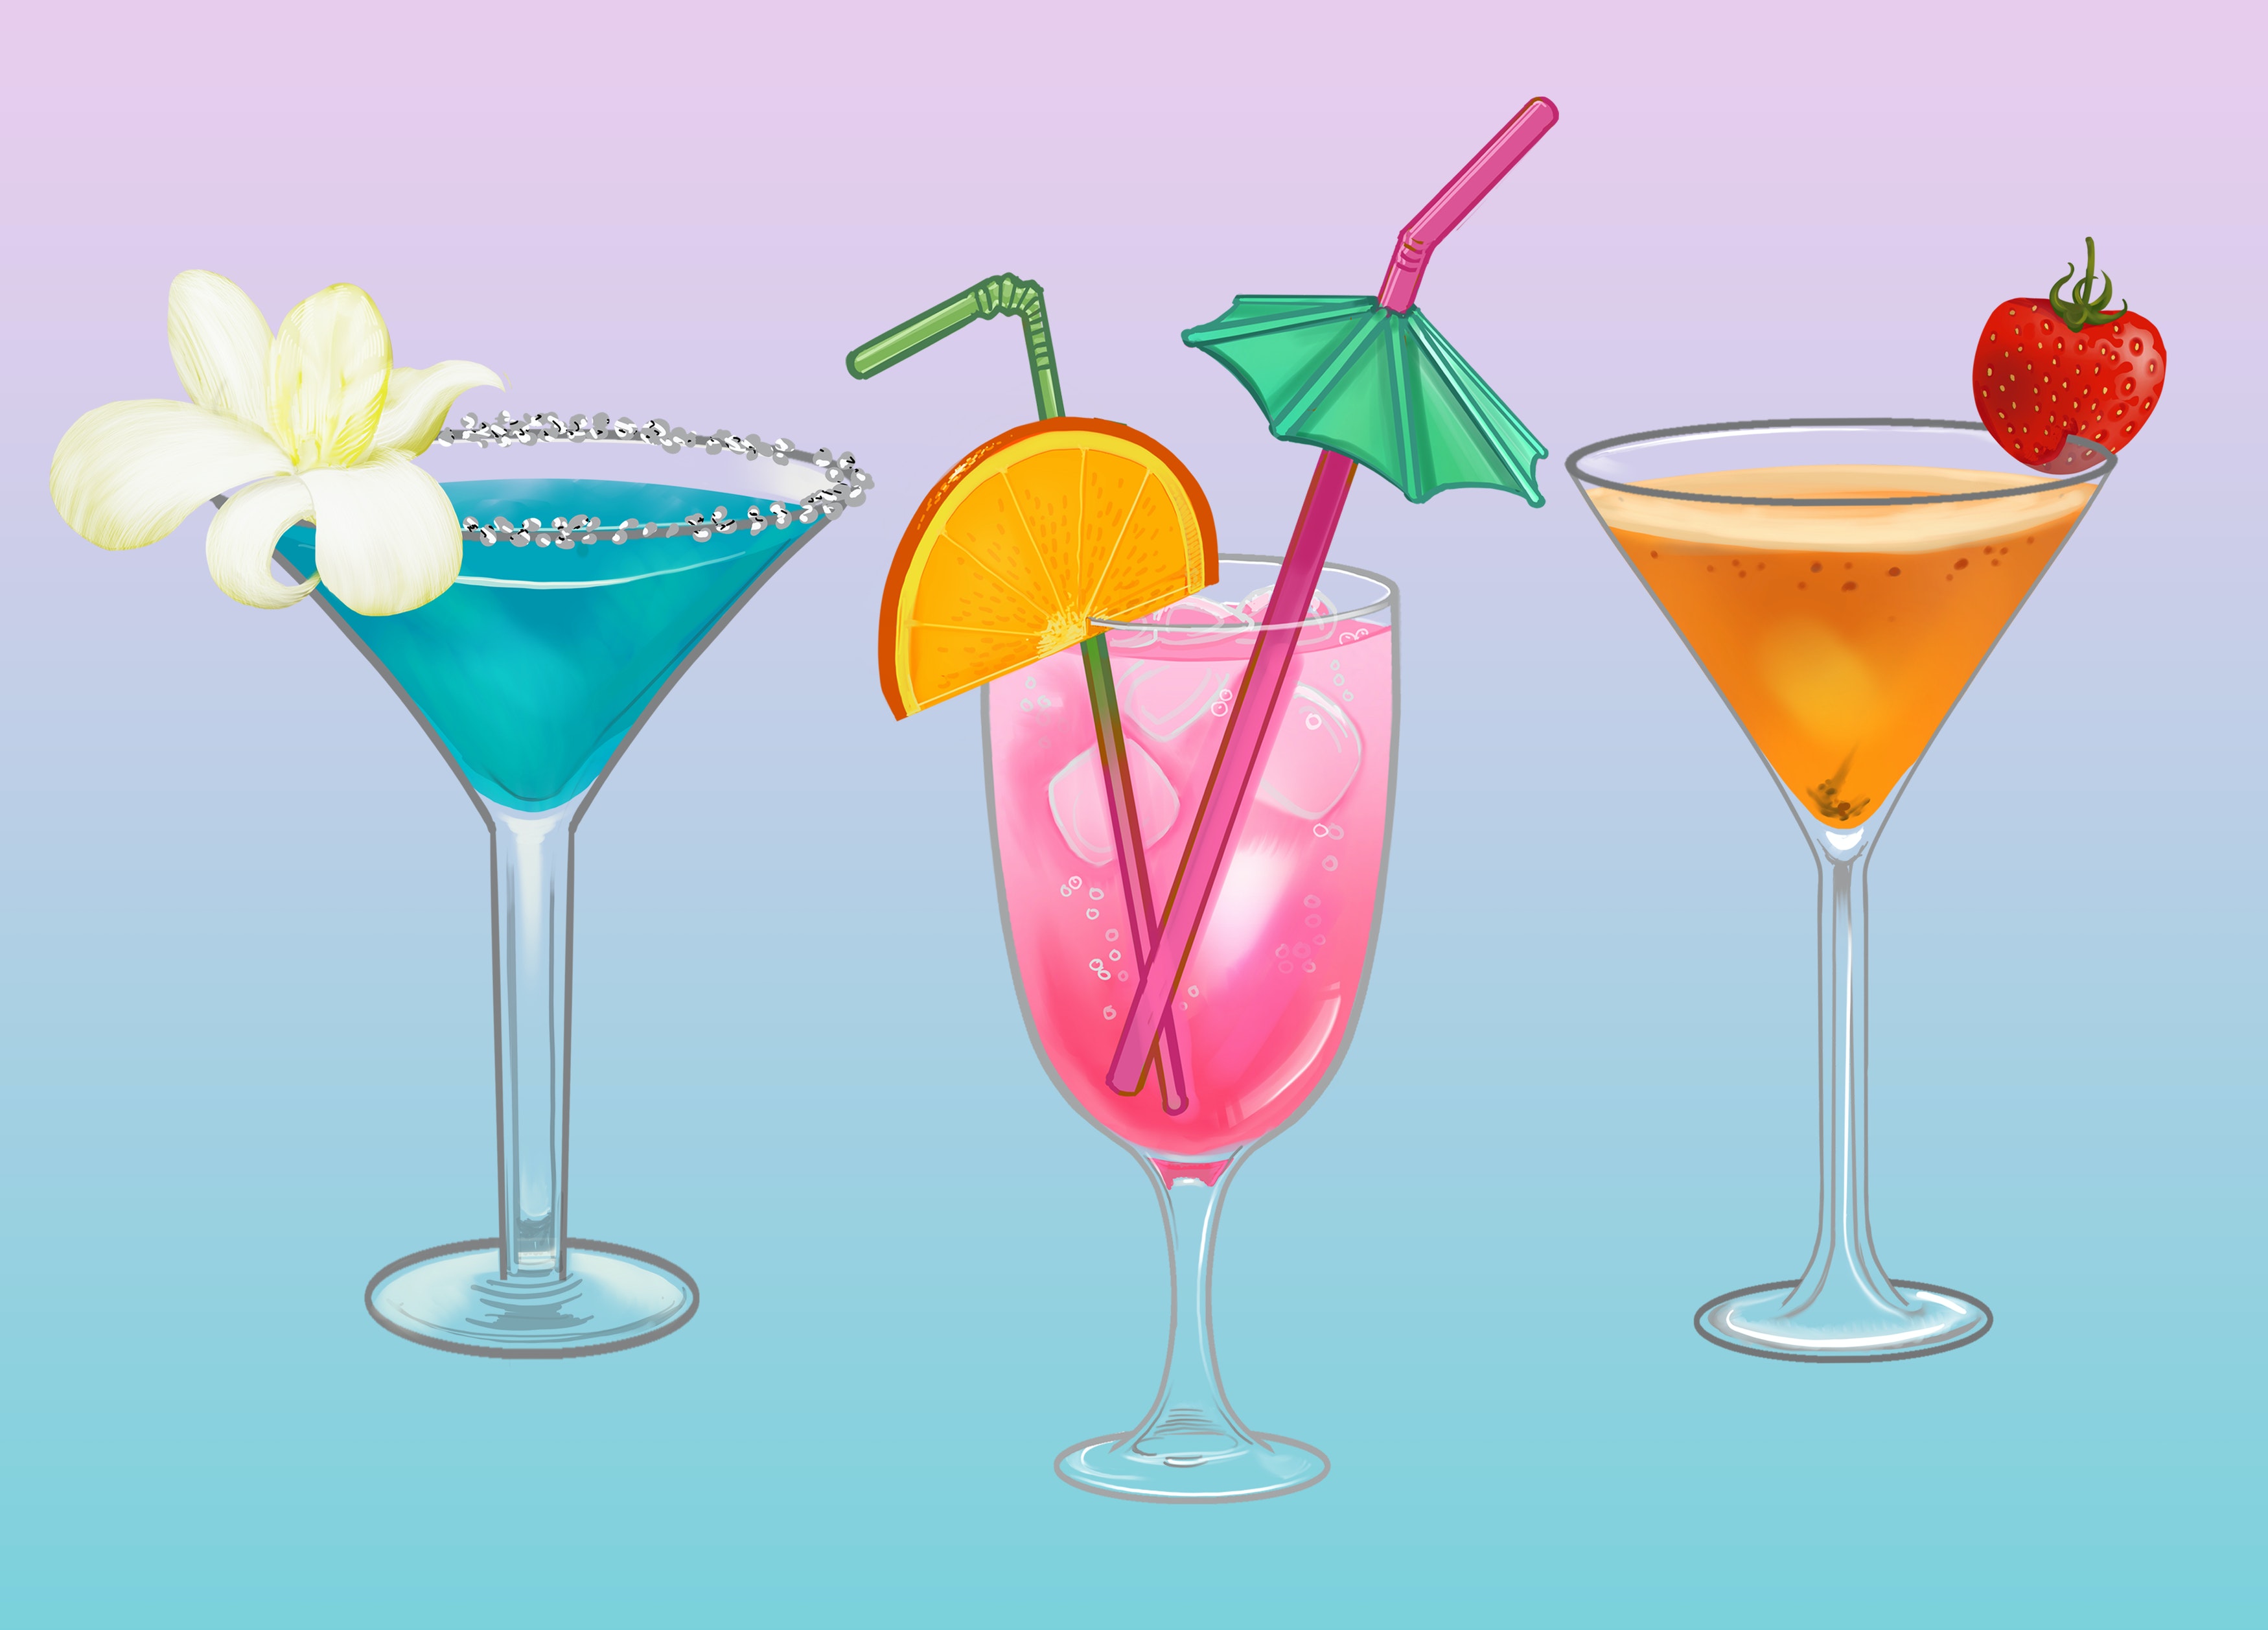 https://www.yuzubakes.com/sites/yuzubakes.com/files/featured-images/different-types-of-coctail-glasses.jpg